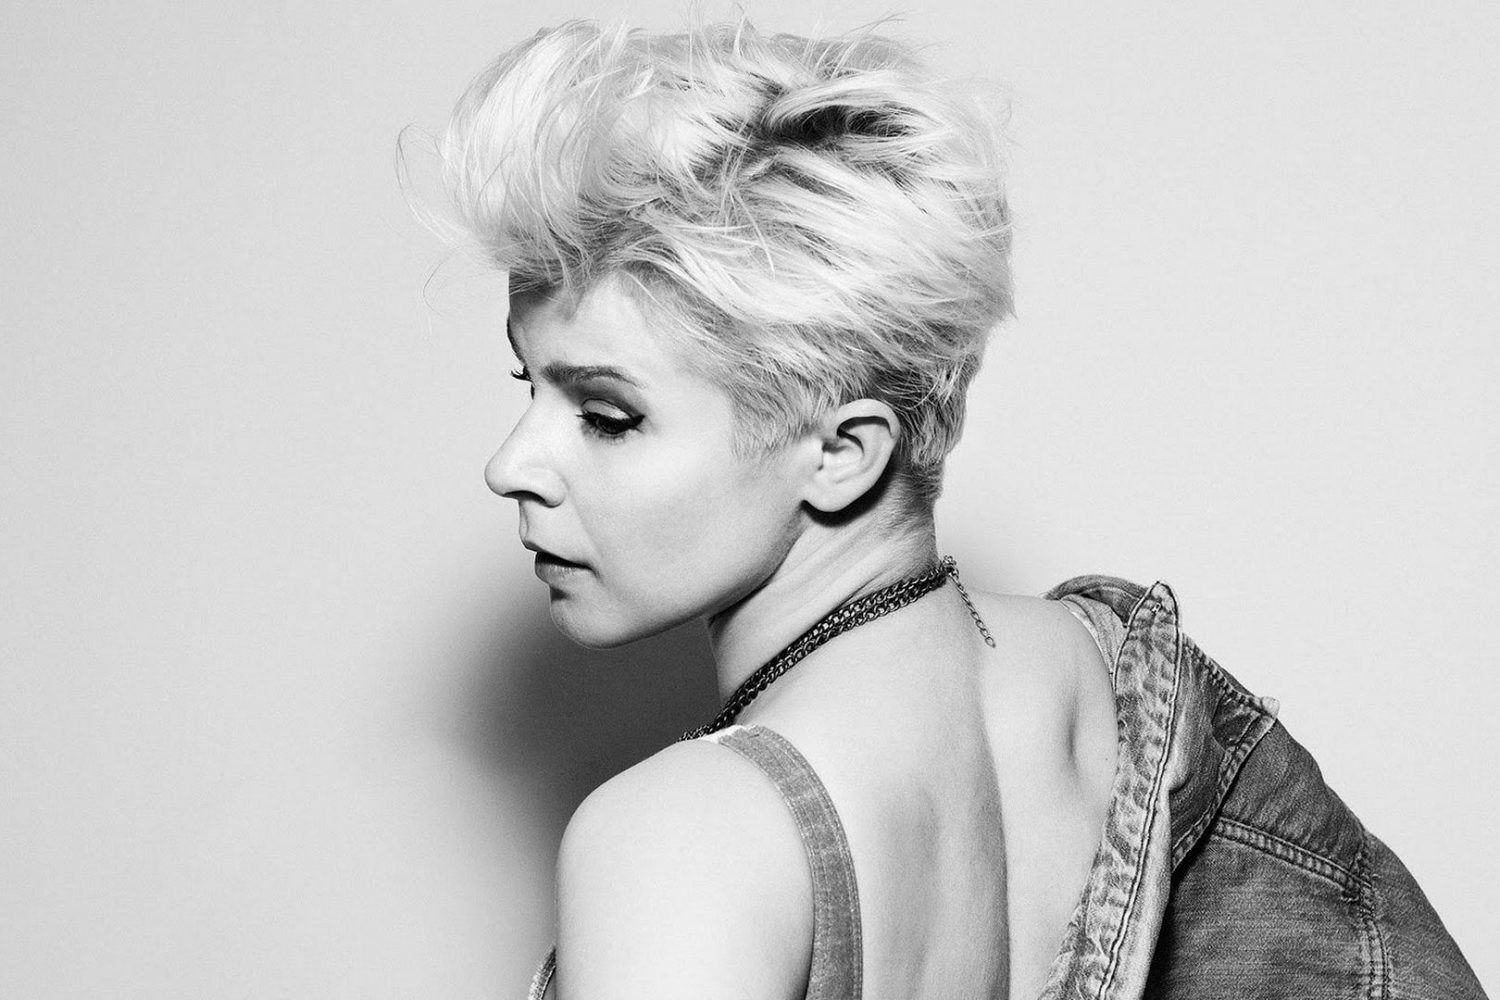 Robyn – Between The Lines (The Black Madonna Remix Edit)